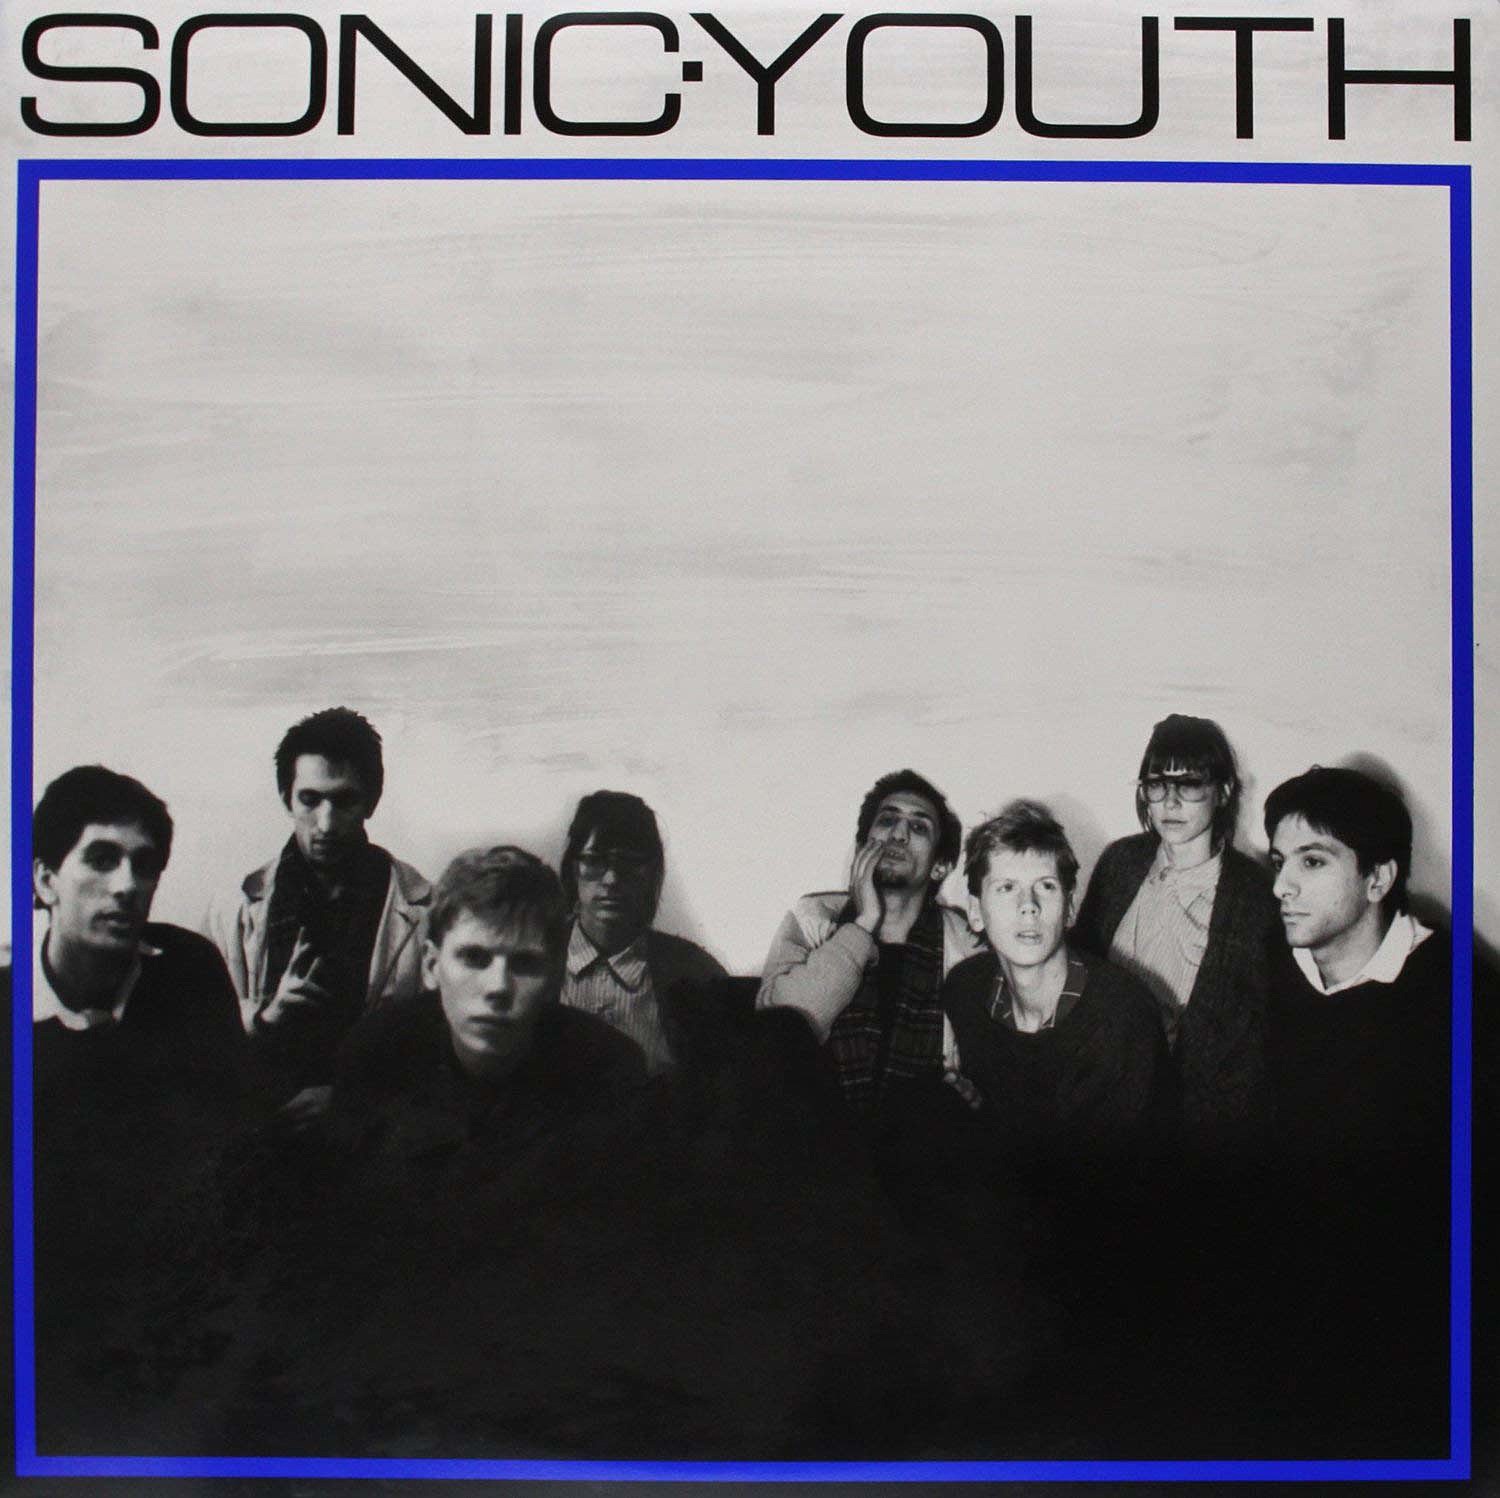 Sonic Youth album guide - a look back on all 16 studio albums